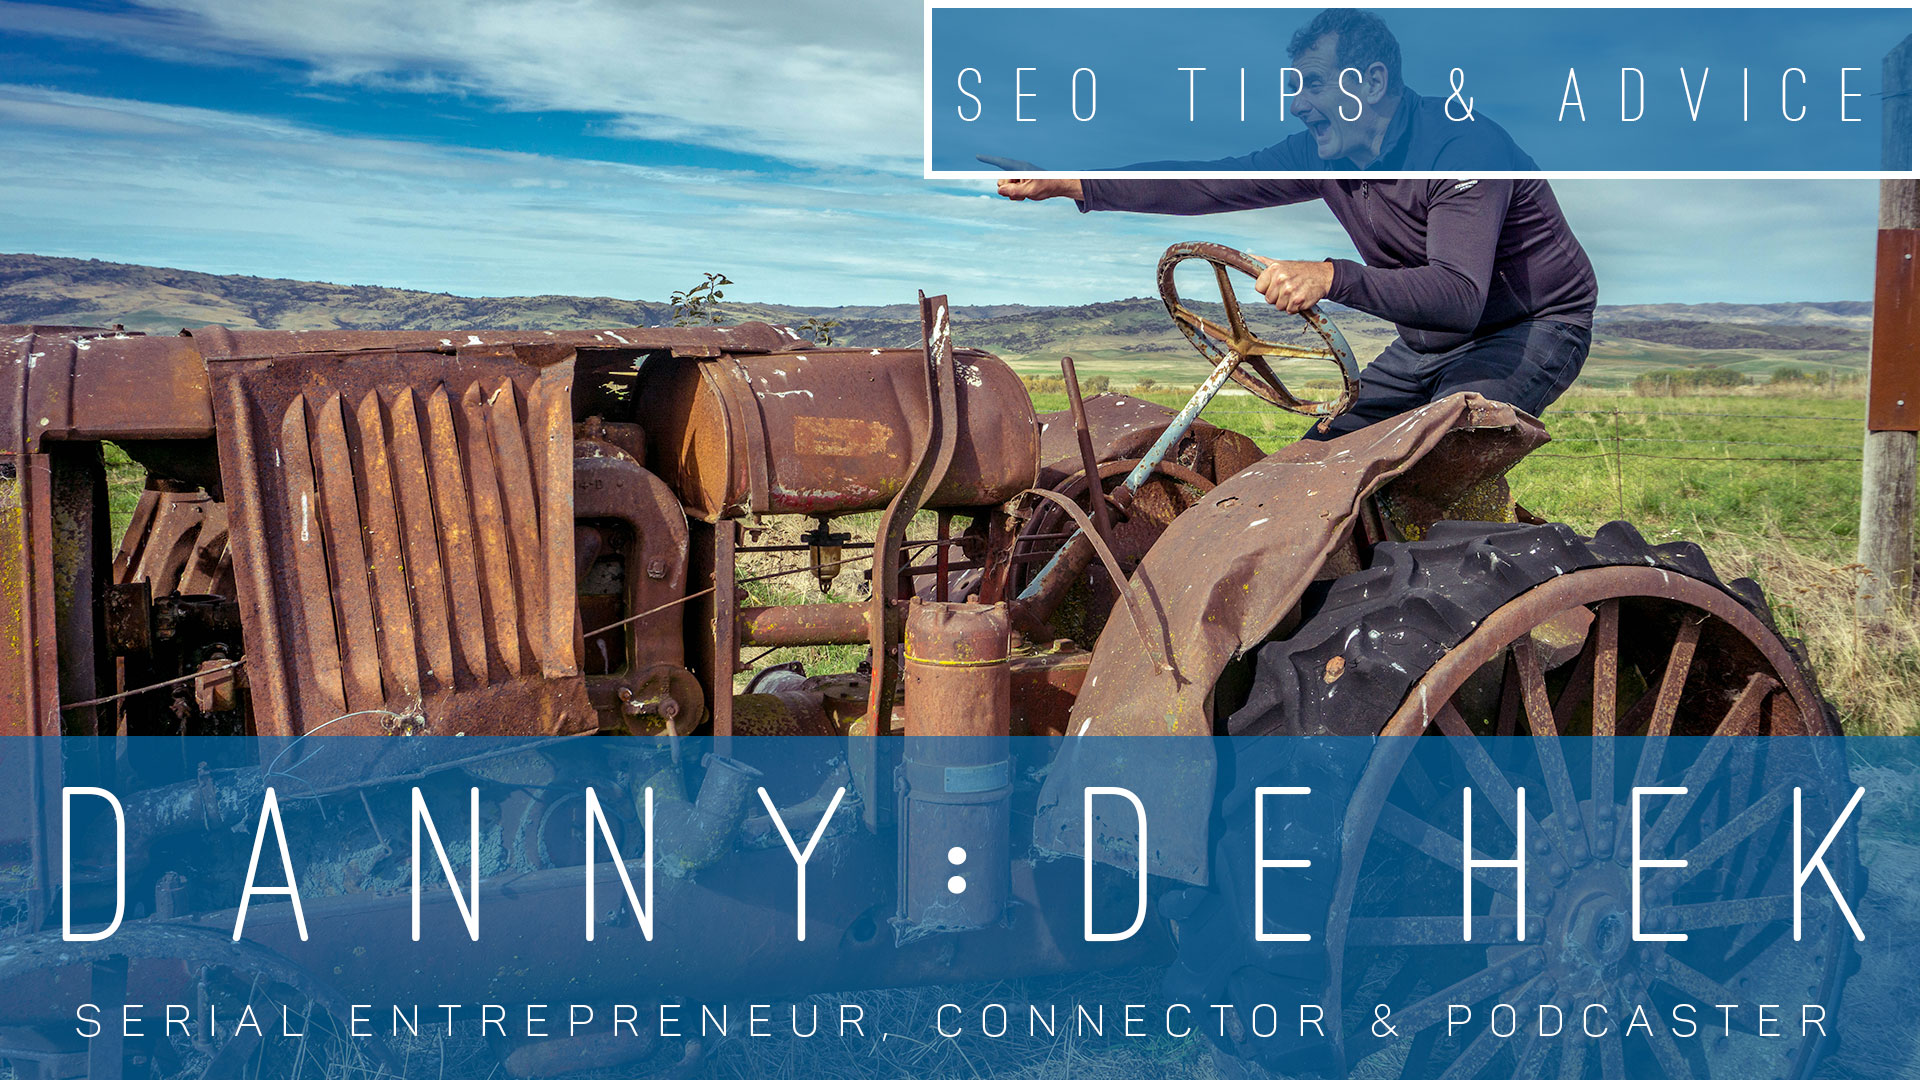 Quick FREE SEO Tips Advice to Increase Organic Traffic by DANNY DE HEKnbsp› Entrepreneur Decision Maker Connector Podcaster Educator